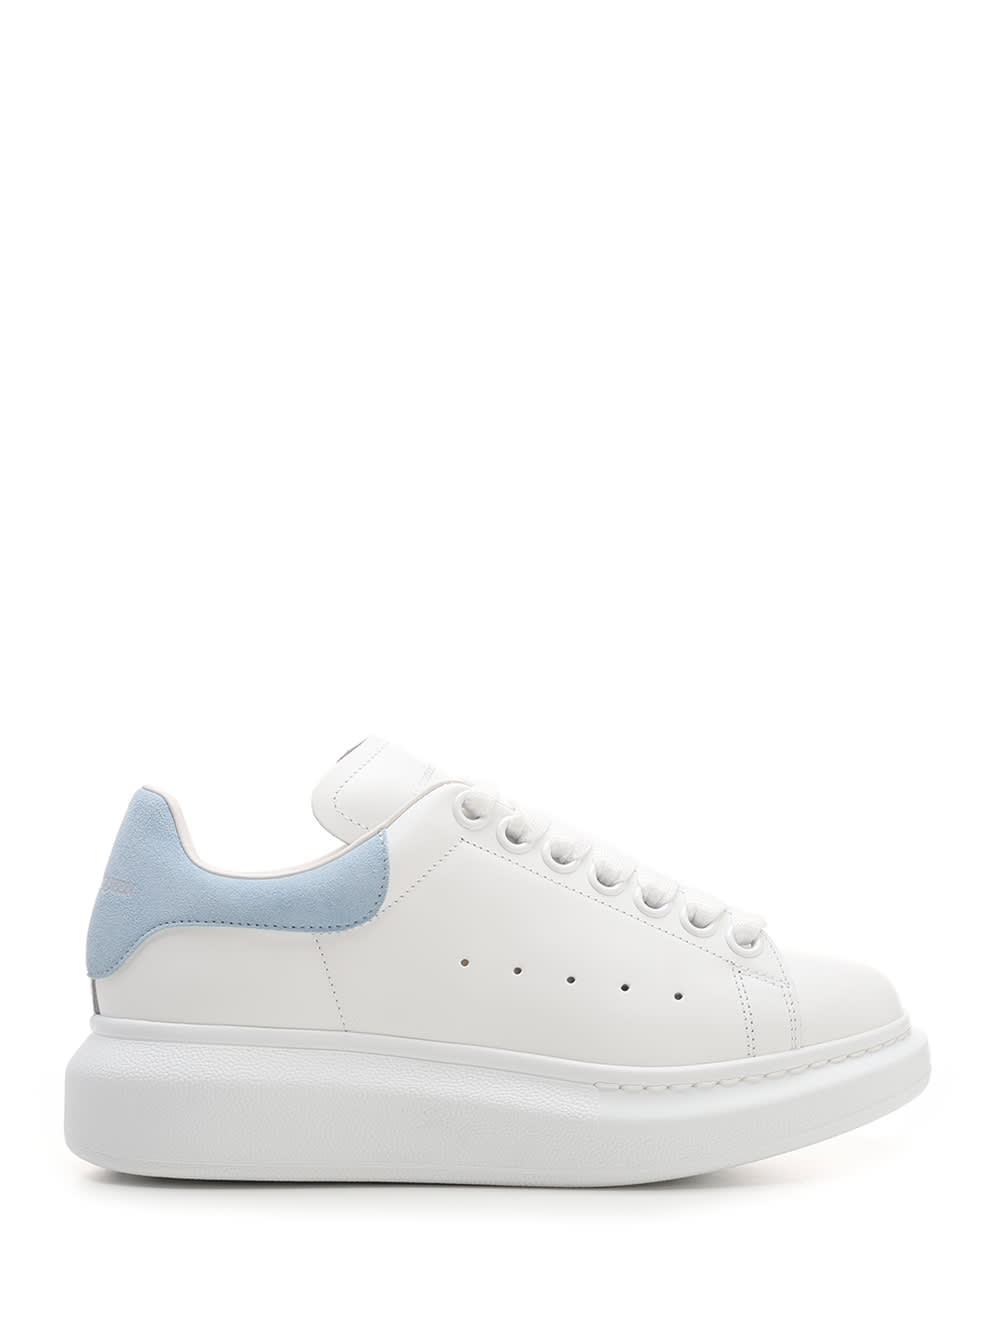 Shop Alexander Mcqueen Oversize Pure White Sneakers In White/powder Blue